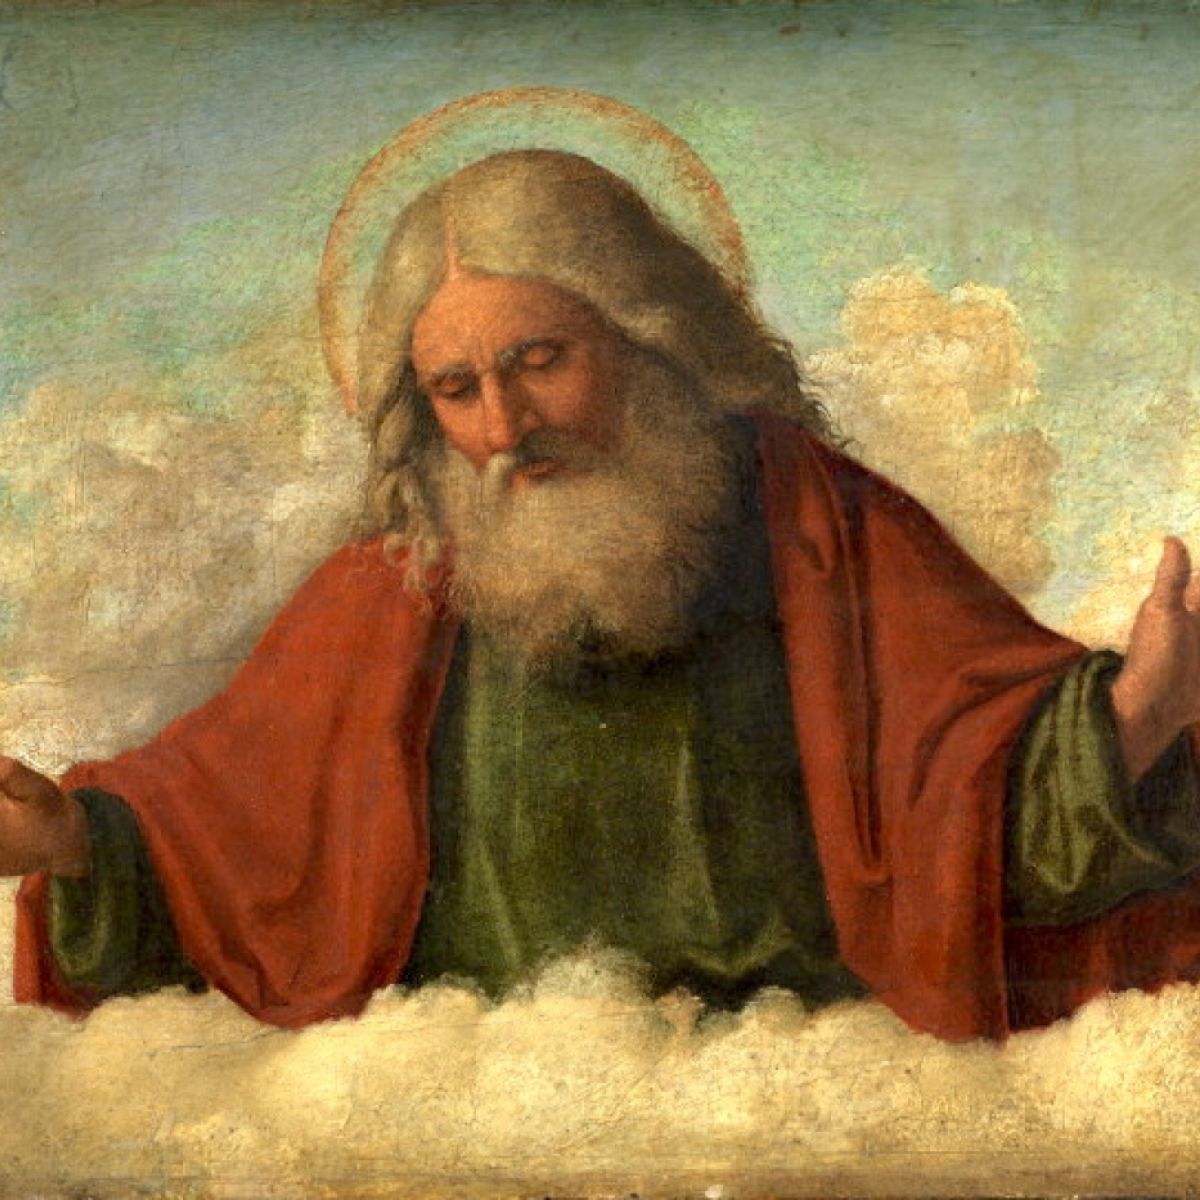 Why Do People Believe in God? | Psychology Today